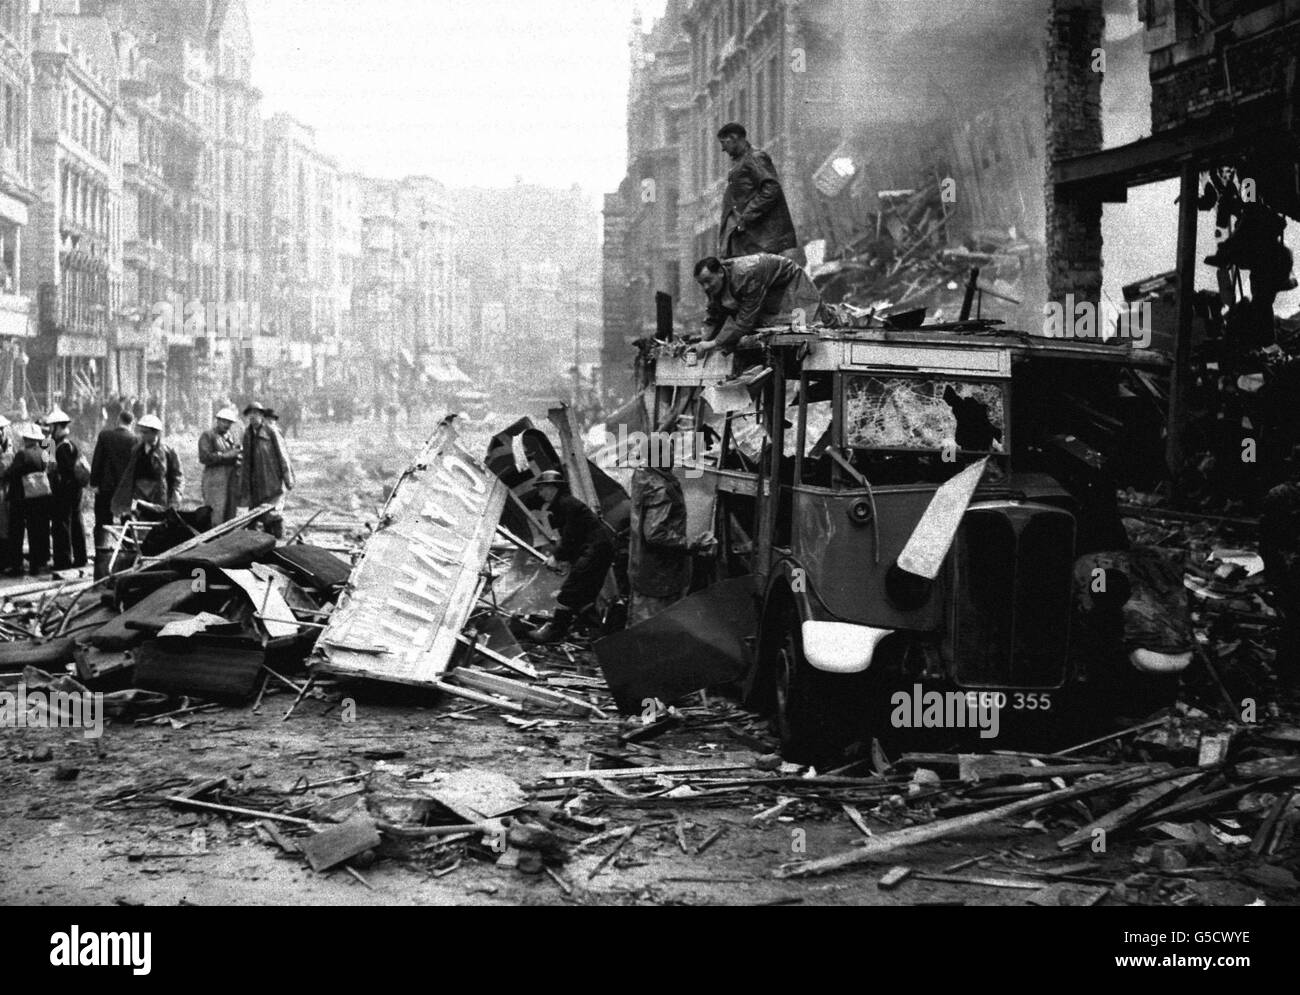 Rescue workers attend to a badly damaged bus in High Holborn, London, amid the damage caused by a Luftwaffe bombing raid during the blitz. Stock Photo